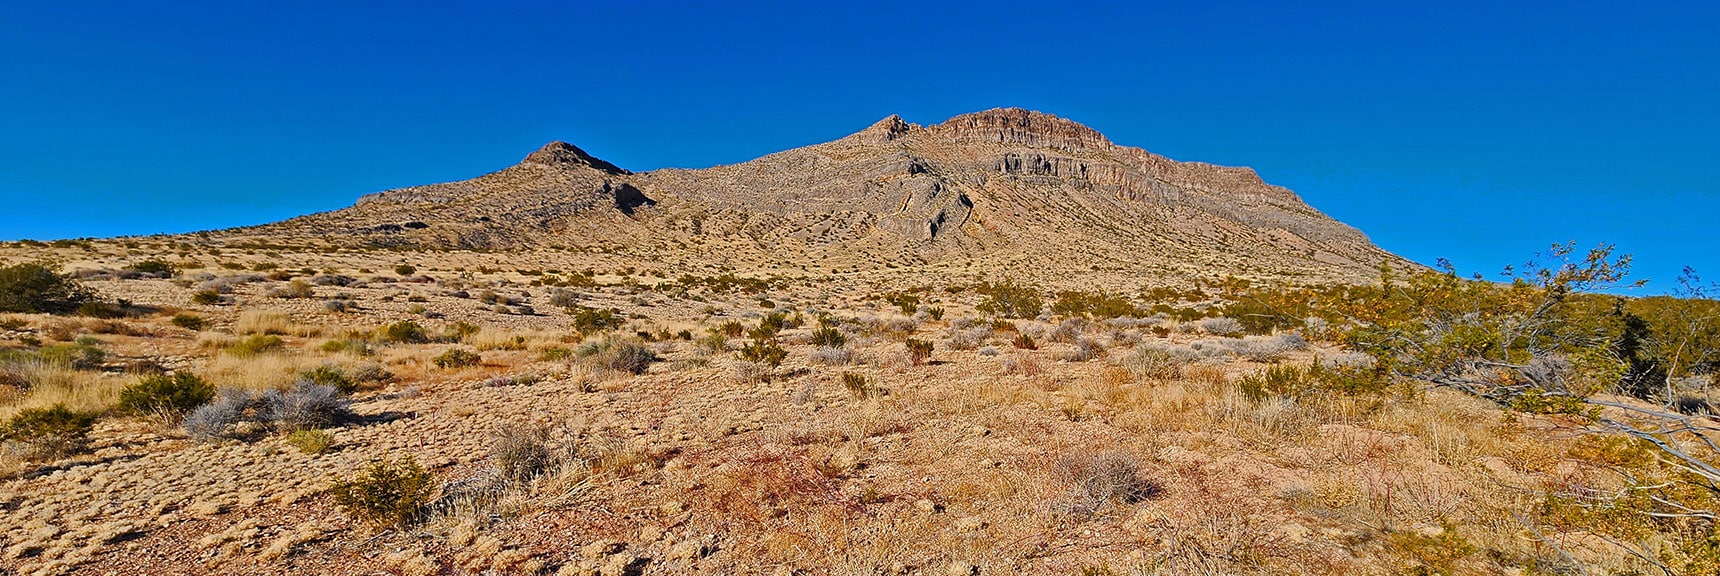 Rounding to the Bluff's South Side, Now on Powerline Maintenance Road Parallel to Hwy 160. | Landmark Bluff Circuit | Lovell Canyon, Nevada